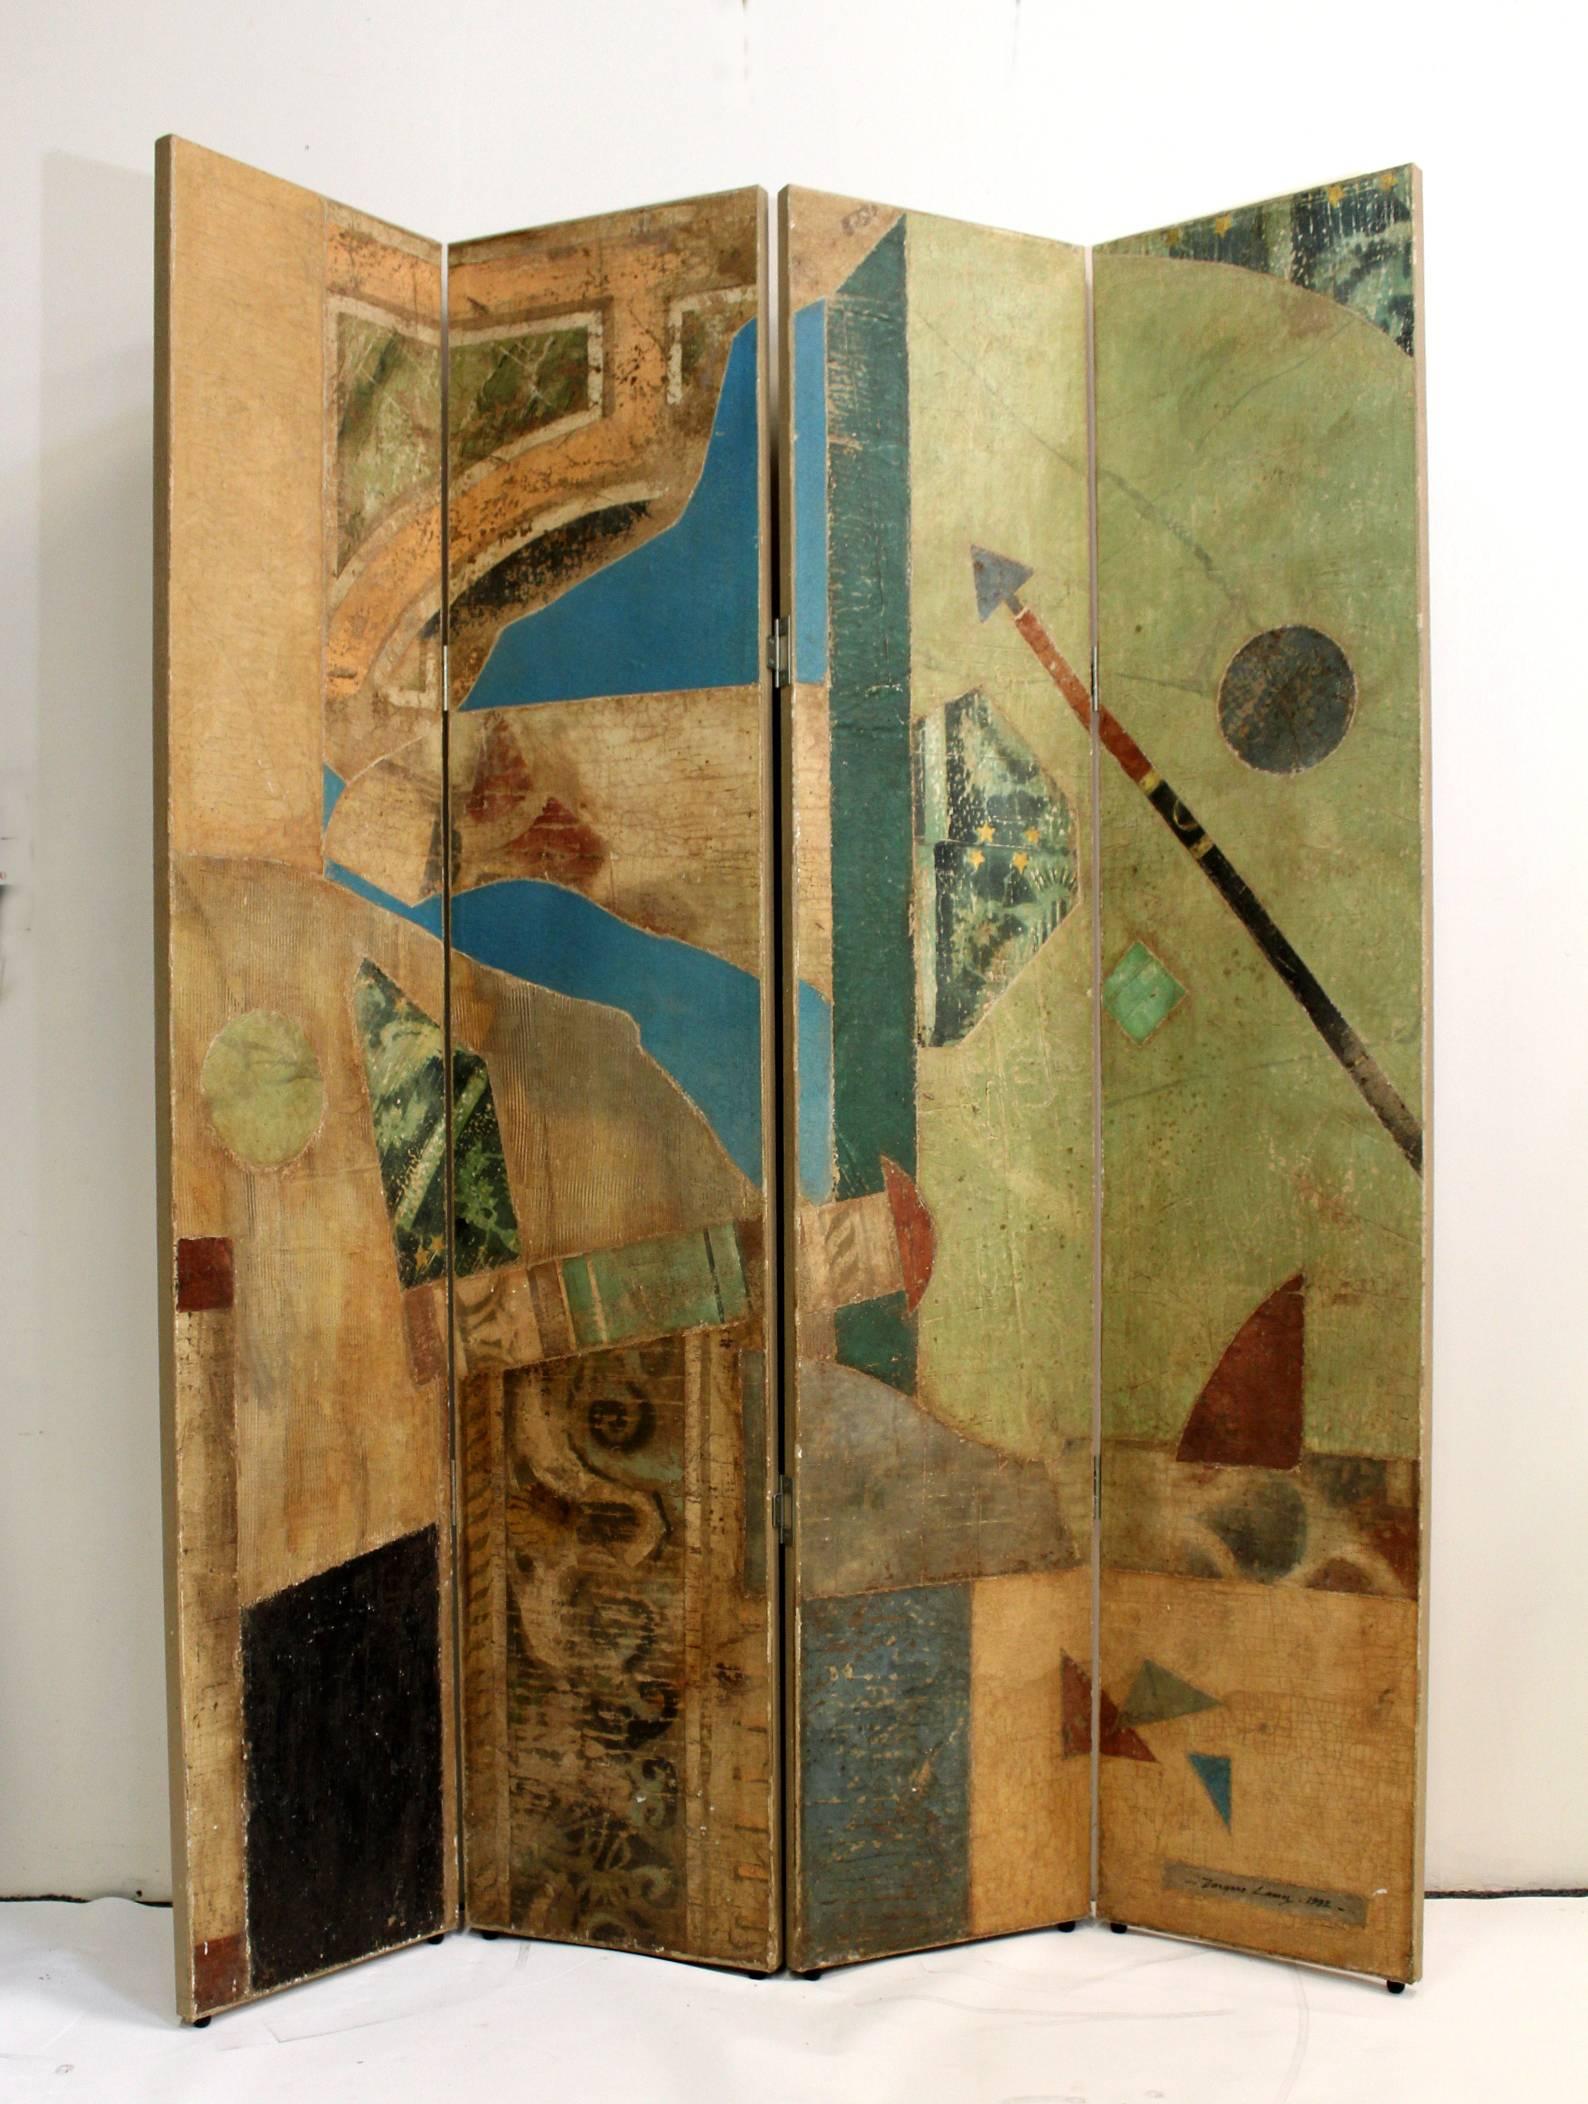 Postmodern, Pop Art folding screen. Made from collaged fresco elements. Paint on plaster on burlap on wood panels. Signed "Jacques Lamy, 1992" on bottom right.
Dimensions open: 63.75" wide x 79.5" high x 1.25"